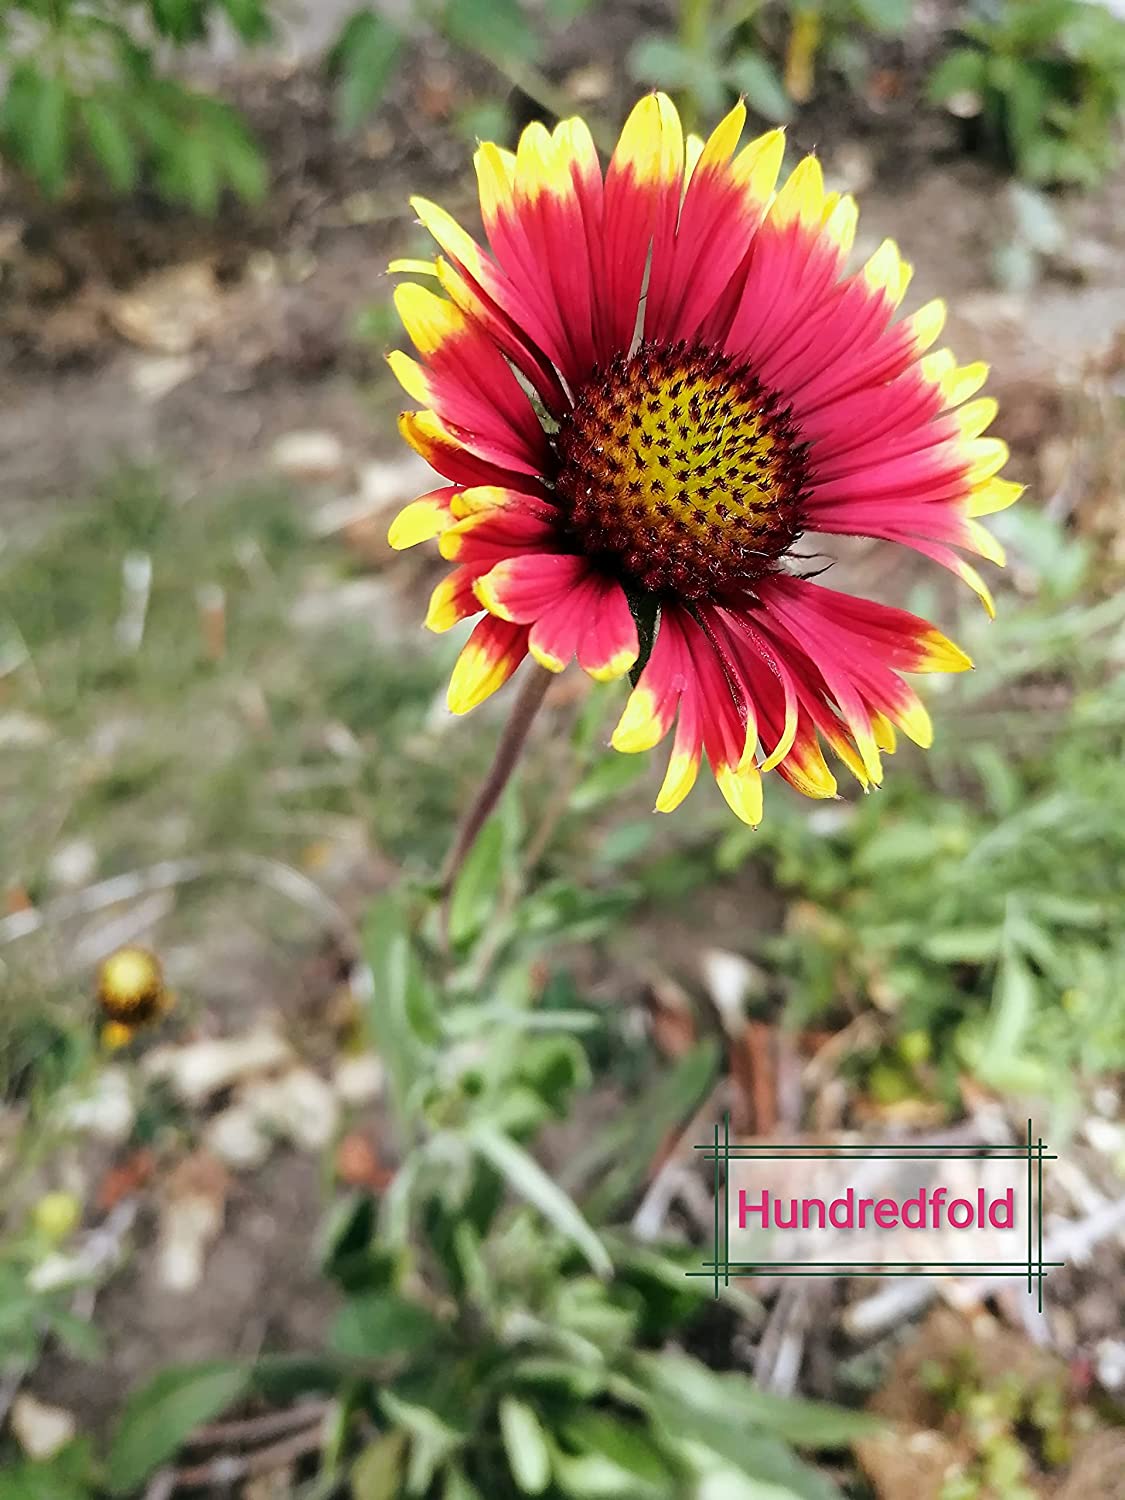 Hundredfold Burgundy Gaillardia 100 Seeds - Gaillardia aristata Blanket Flower, Native Prairie Flower, Hardy Perennial, Perfect for Care-Free Bee & Flower Garden, Packed and Shipped in Canada